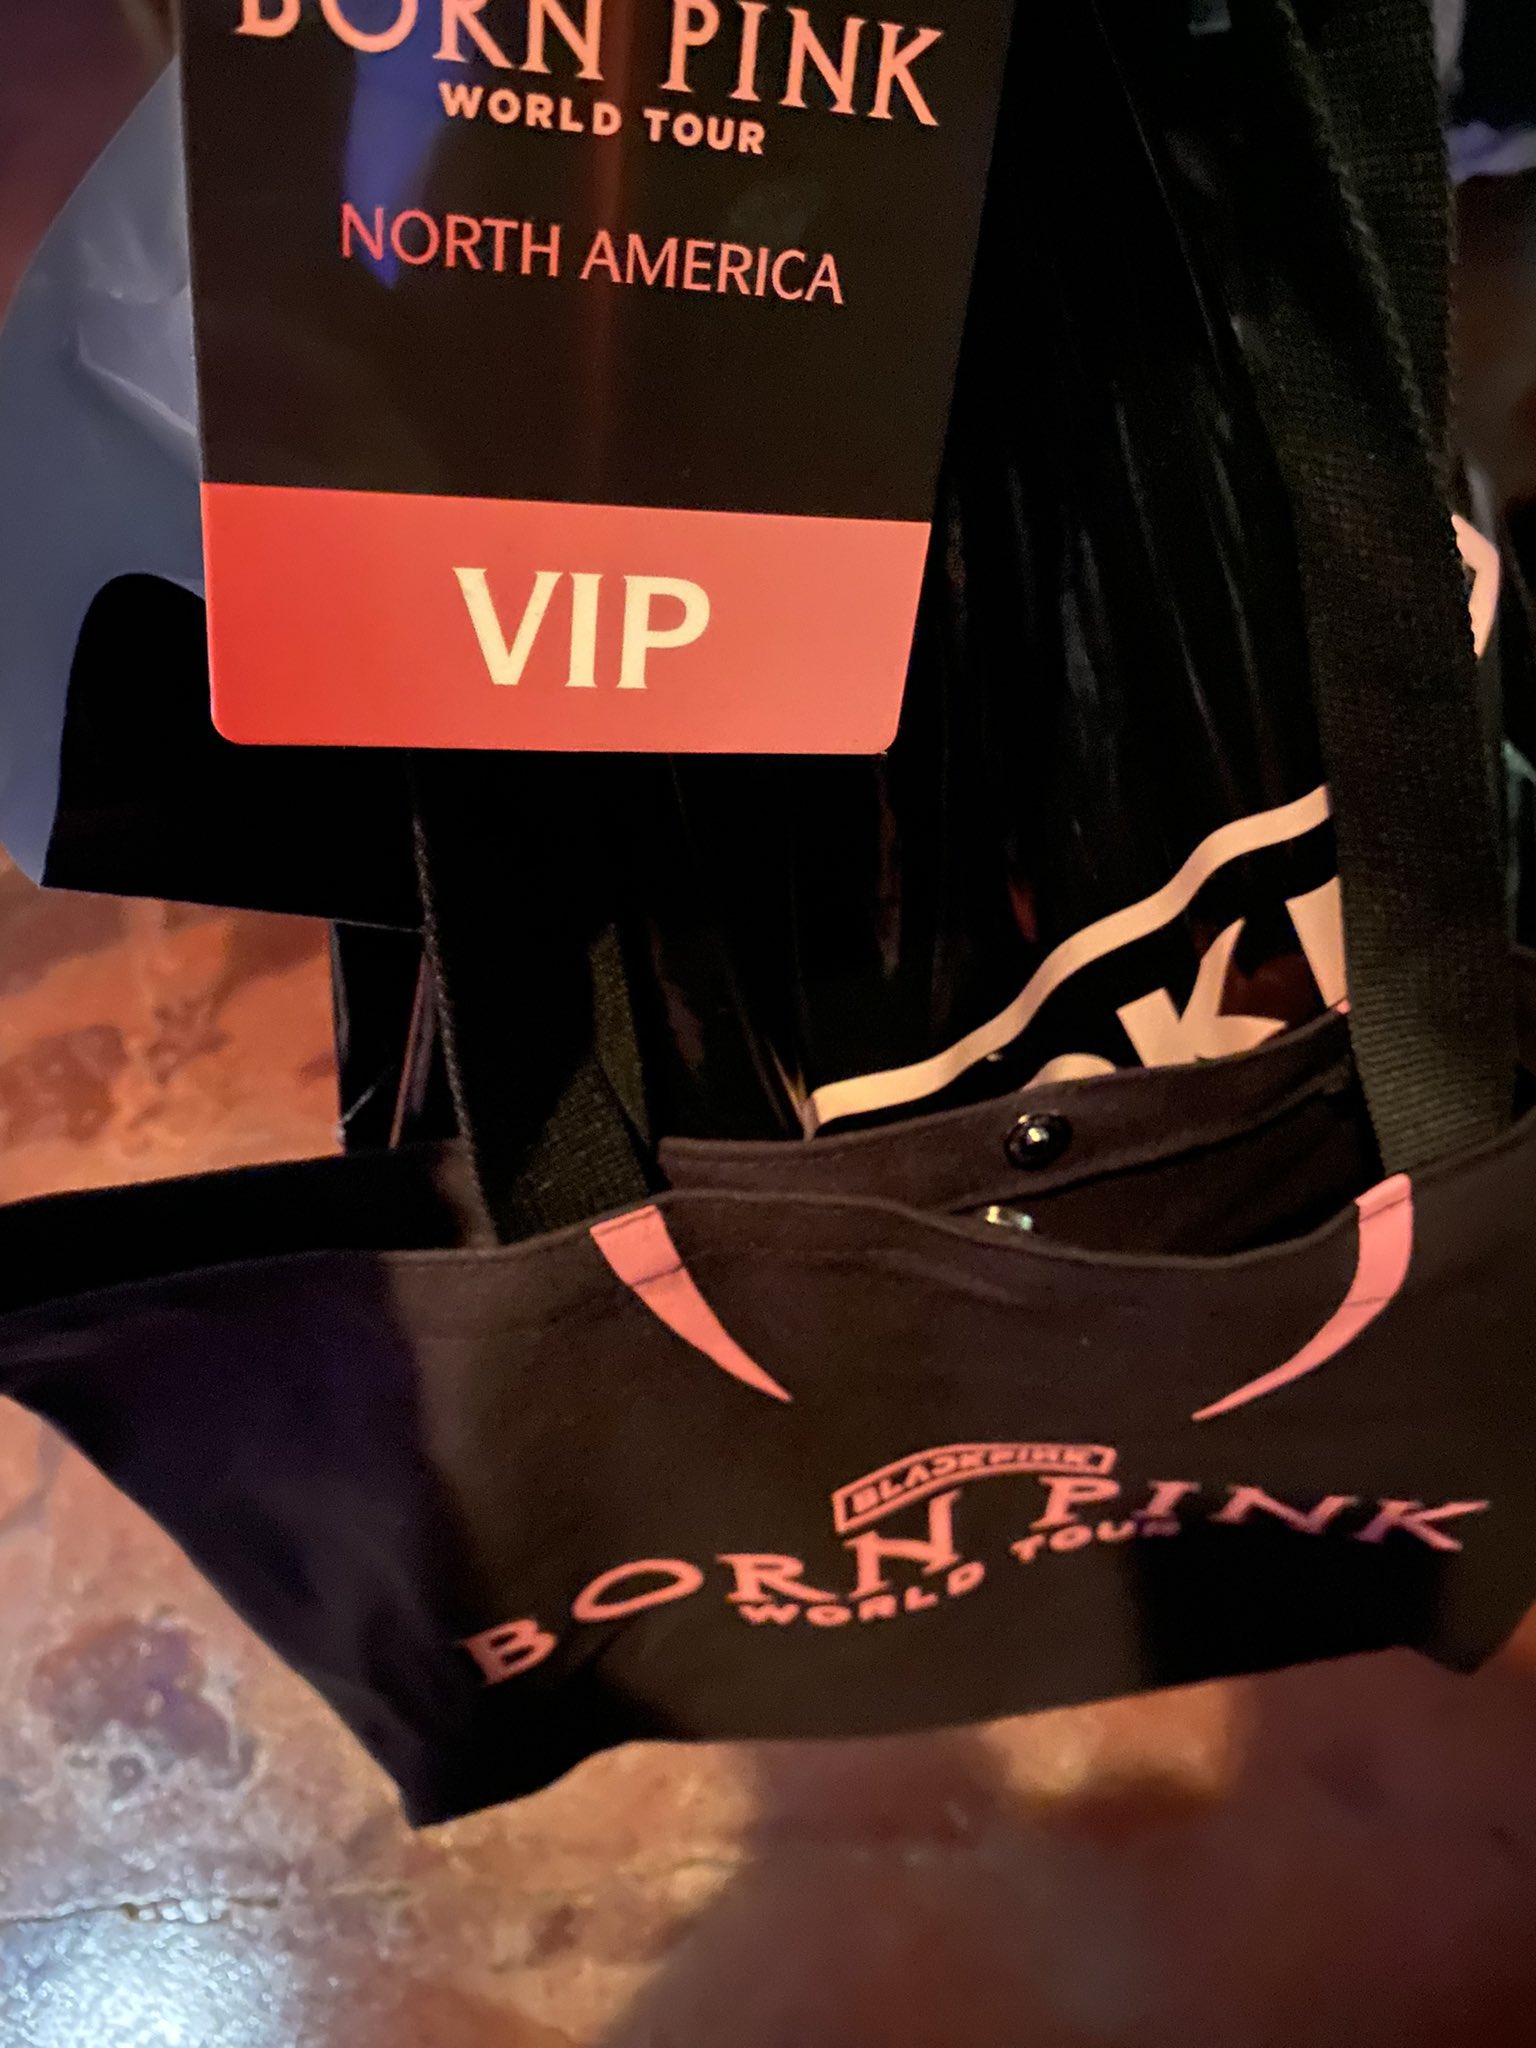 WTS][USA] BLACKPINK BORN PINK ENCORE LAS VEGAS - 1x BLINK PLUS EXPERIENCE  (VIP PACKAGE incl. ARTIST SOUNDCHECK ) Section A4, Row 34, Seat 17, August  18 (Friday) Selling @ $500 (FV) : r/kpopforsale